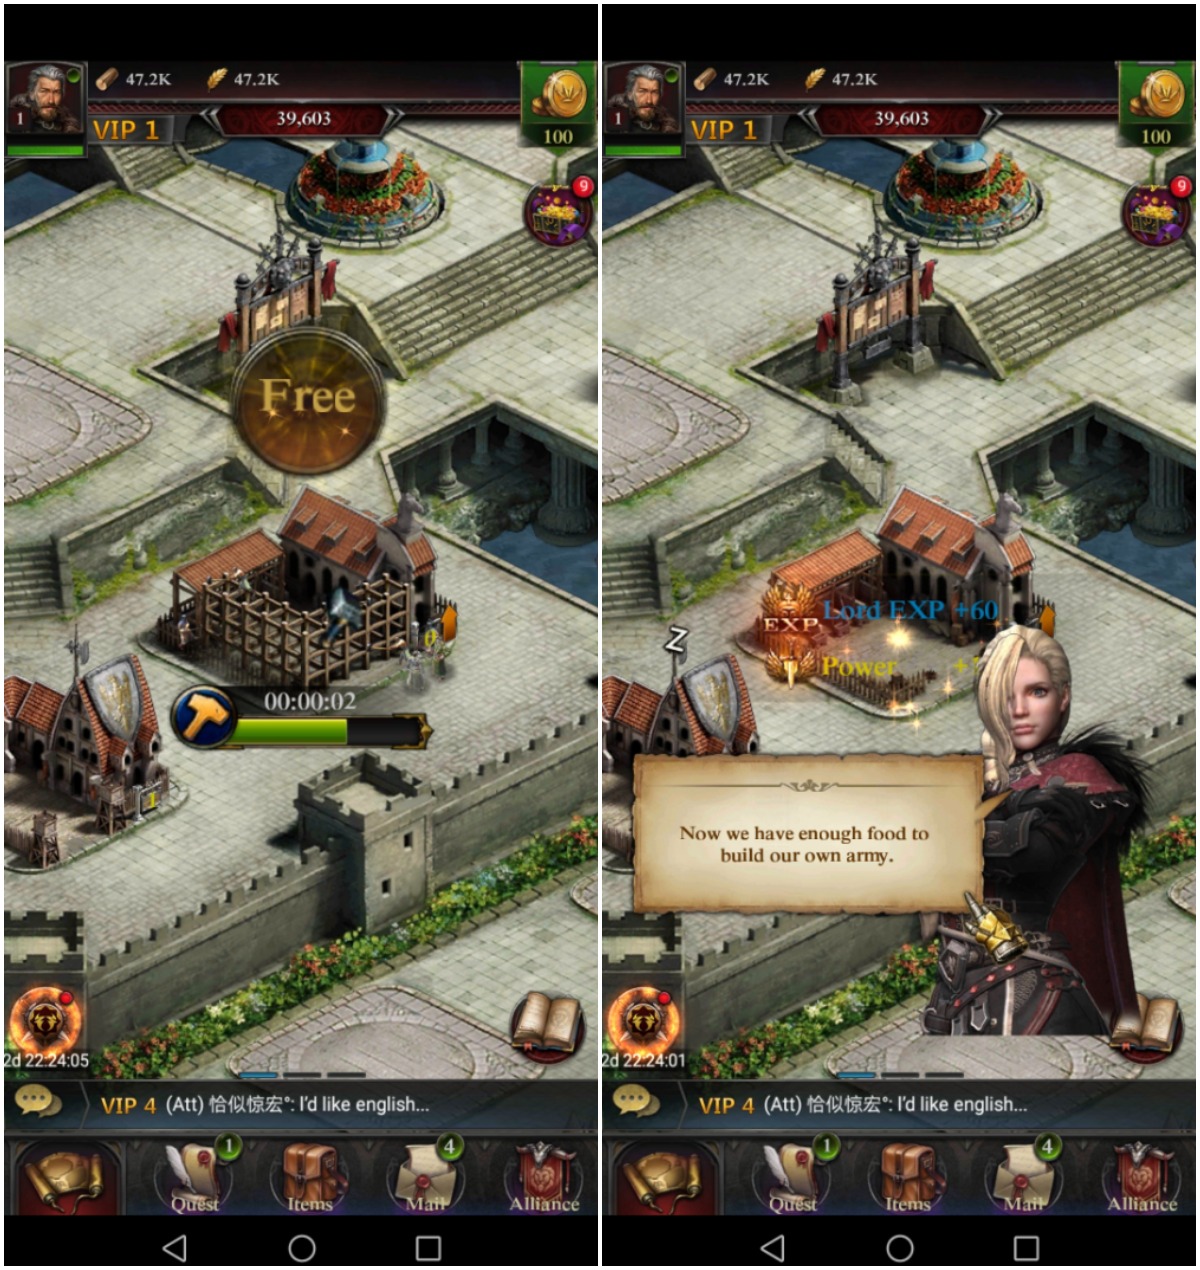 Clash of Kings Strategy Community